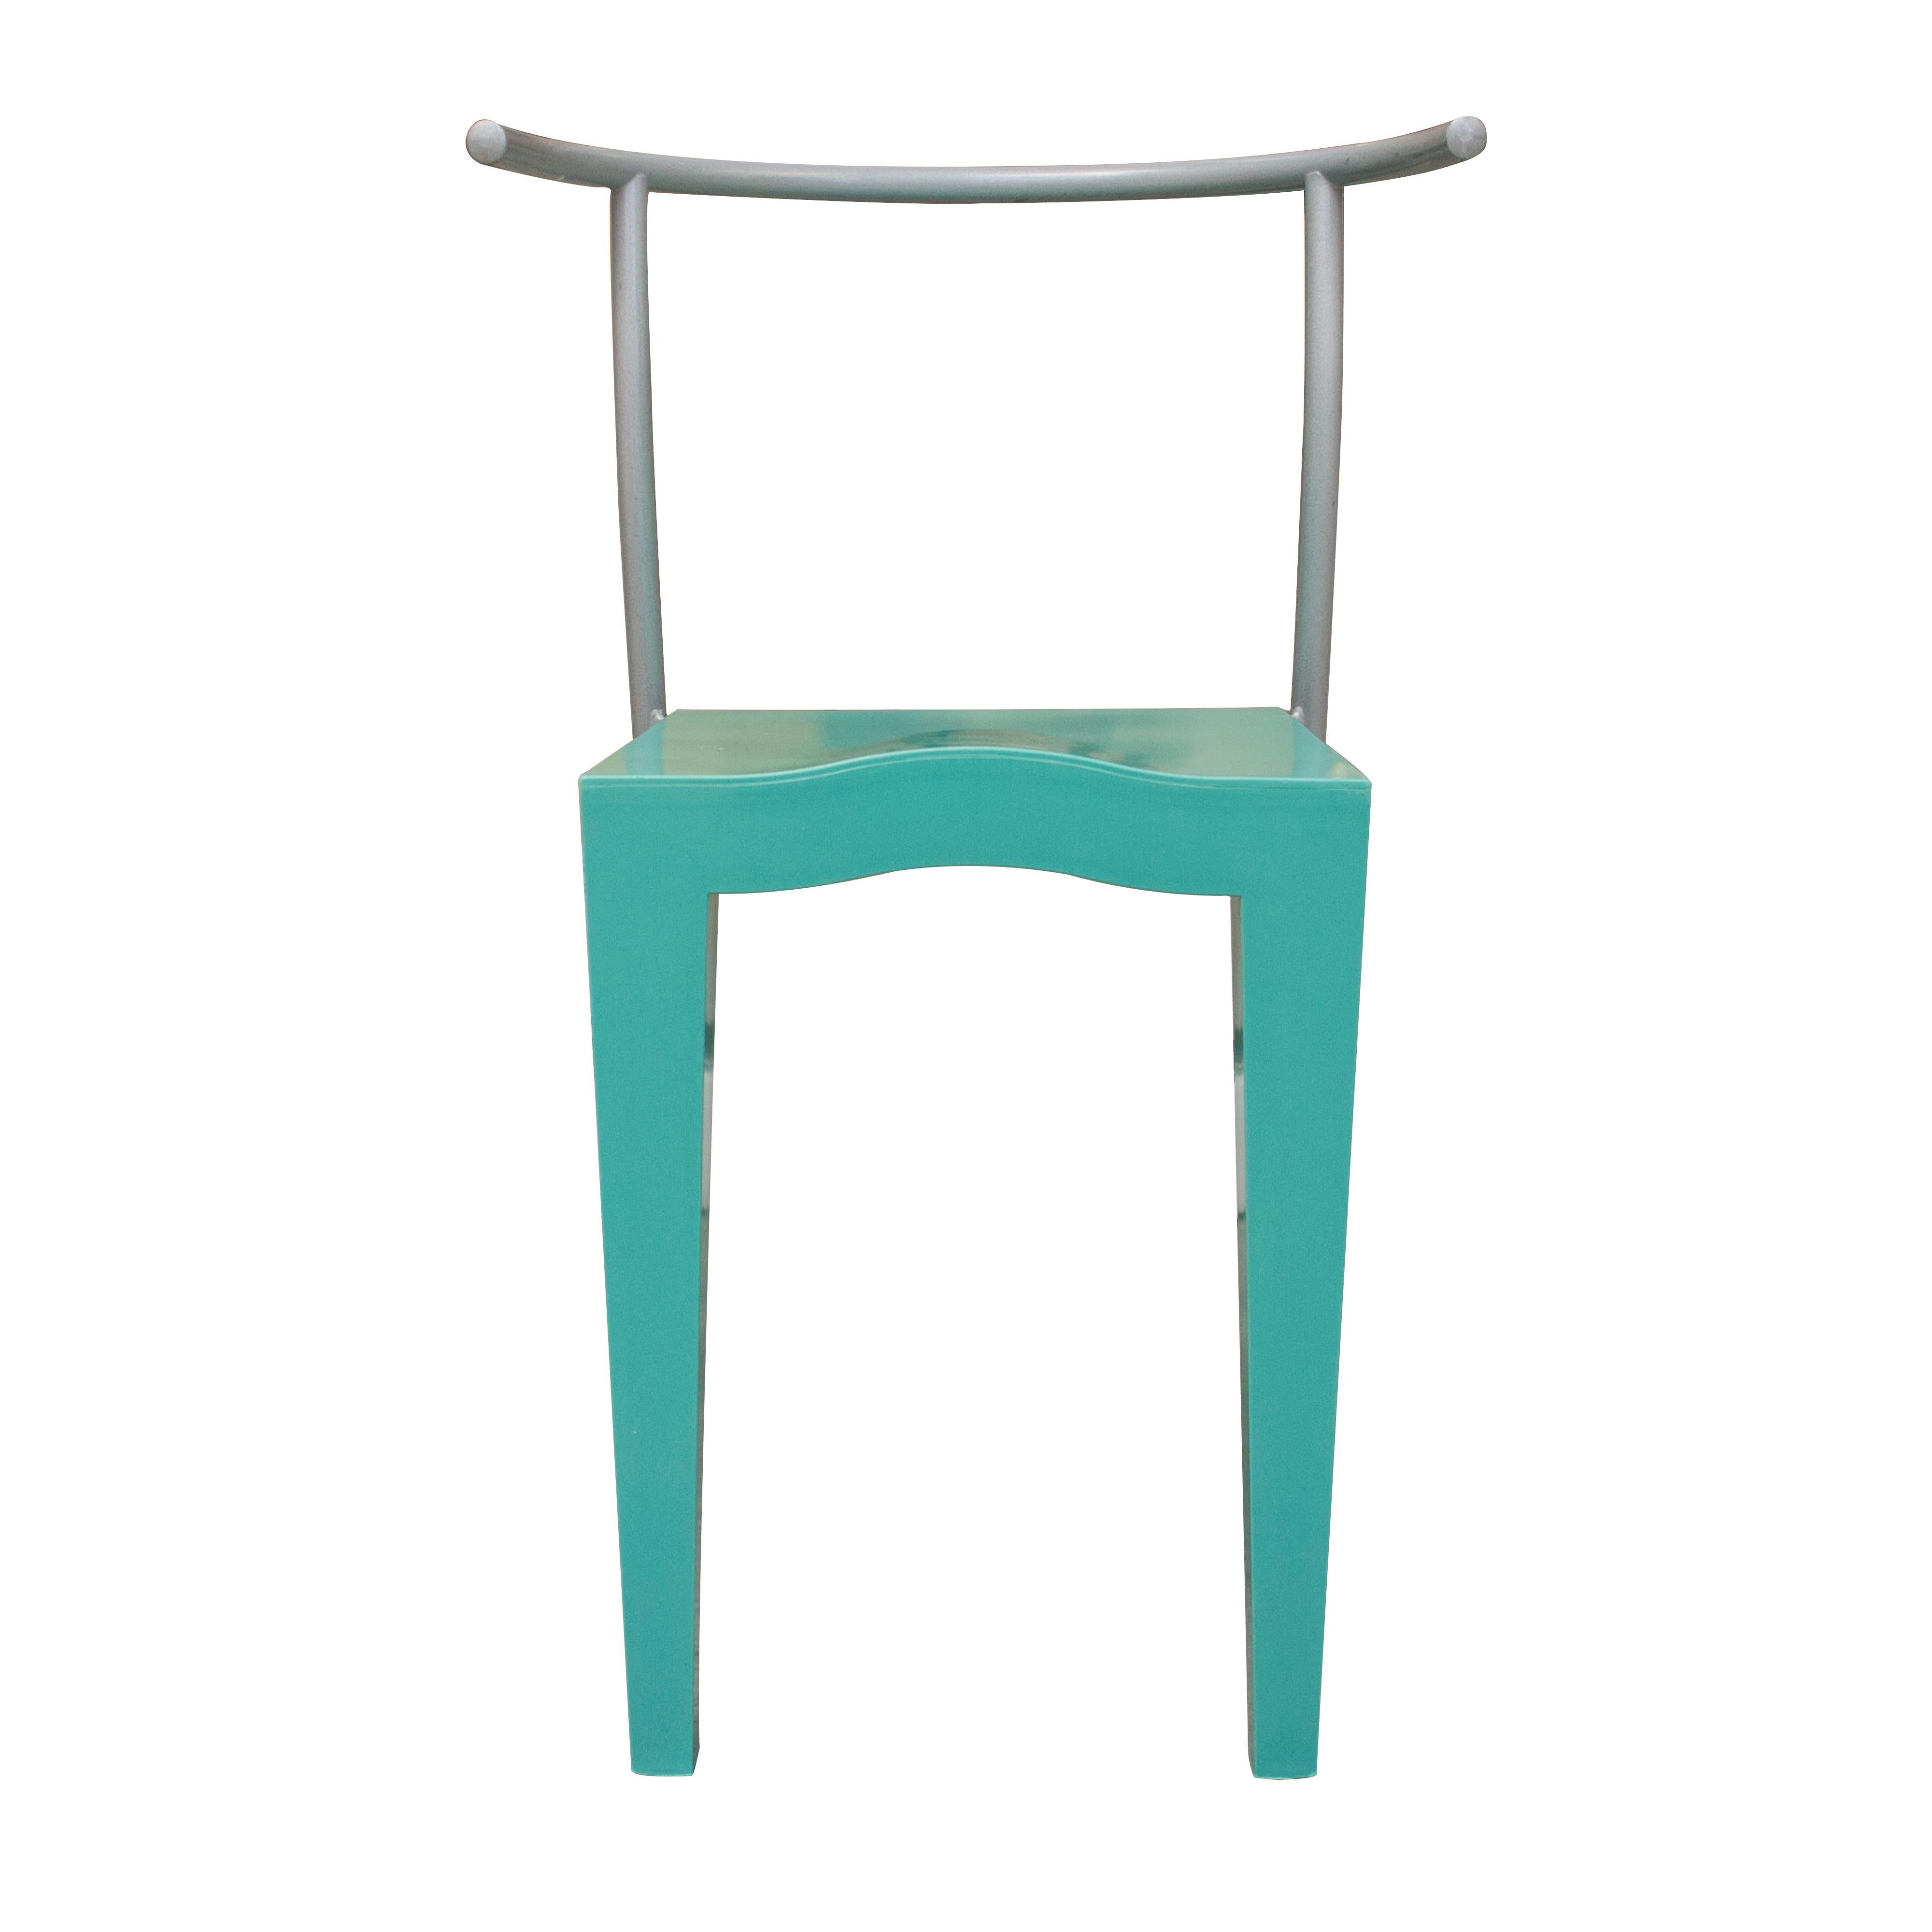 Set of 4 stackable chairs designed by Phillipe Starck in 1988 and edited by Kartell. Dr. Glob was born from the idea of bringing together different materials to achieve a firmer structure and a new design, based on the contrast between thickness and